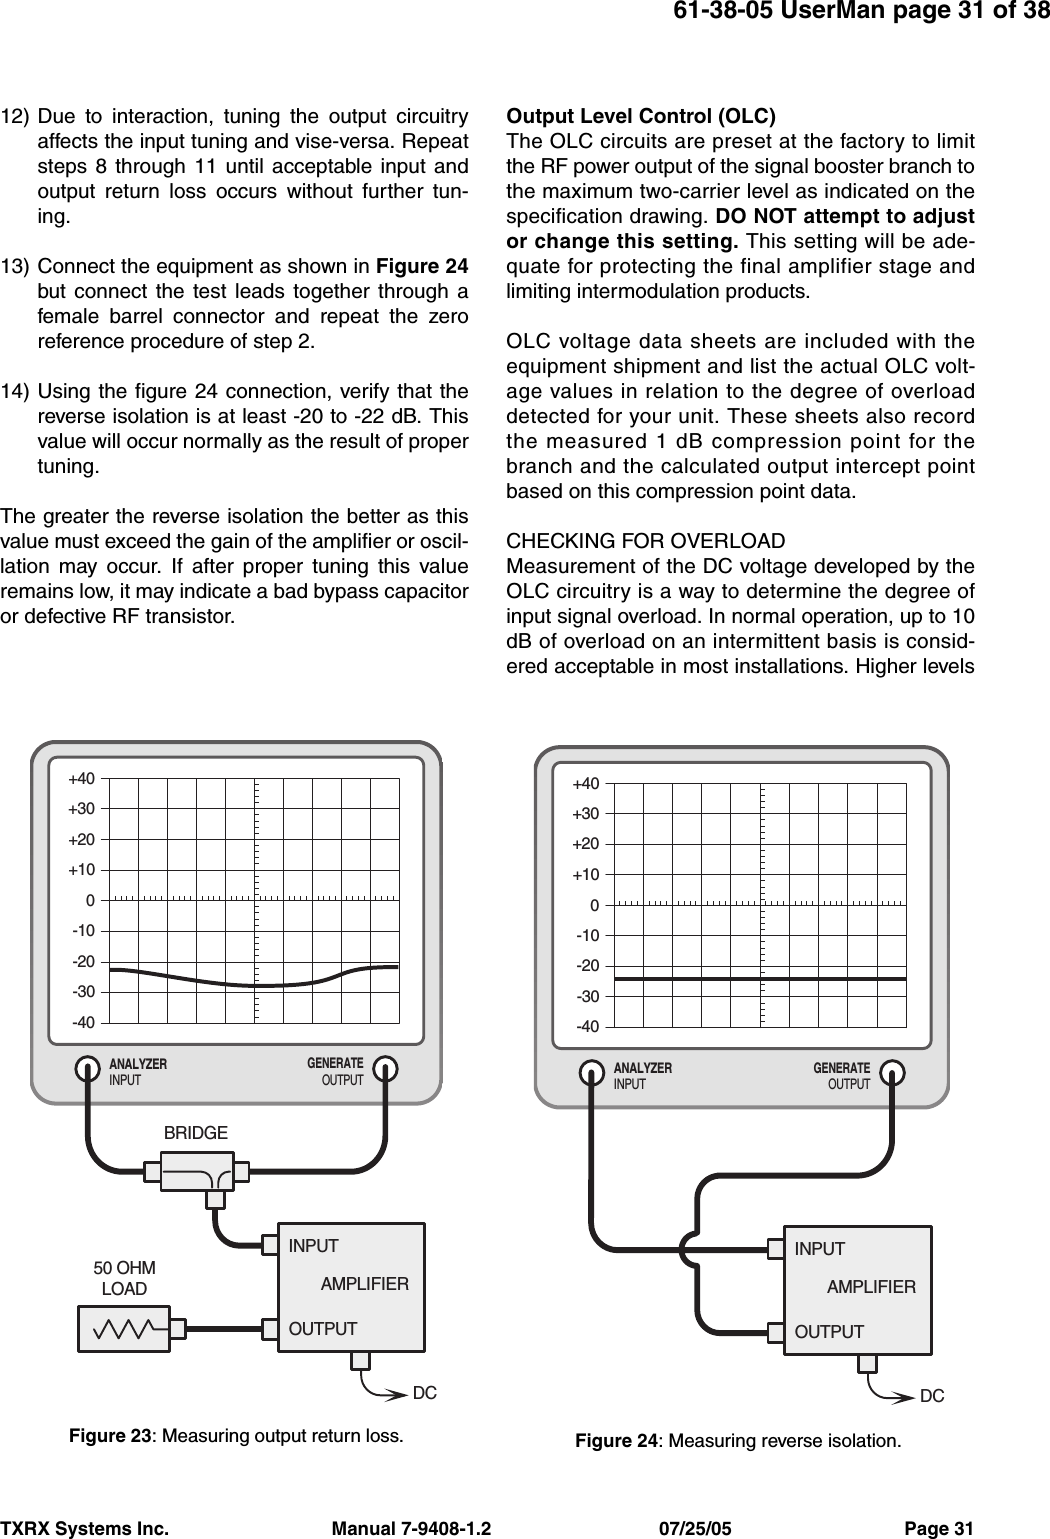 TXRX Systems Inc.                                Manual 7-9408-1.2                                 07/25/05                                  Page 3161-38-05 UserMan page 31 of 3812) Due to interaction, tuning the output circuitryaffects the input tuning and vise-versa. Repeatsteps 8 through 11 until acceptable input andoutput return loss occurs without further tun-ing. 13) Connect the equipment as shown in Figure 24but connect the test leads together through afemale barrel connector and repeat the zeroreference procedure of step 2.14) Using the figure 24 connection, verify that thereverse isolation is at least -20 to -22 dB. Thisvalue will occur normally as the result of propertuning.The greater the reverse isolation the better as thisvalue must exceed the gain of the amplifier or oscil-lation may occur. If after proper tuning this valueremains low, it may indicate a bad bypass capacitoror defective RF transistor.Output Level Control (OLC)The OLC circuits are preset at the factory to limitthe RF power output of the signal booster branch tothe maximum two-carrier level as indicated on thespecification drawing. DO NOT attempt to adjustor change this setting. This setting will be ade-quate for protecting the final amplifier stage andlimiting intermodulation products.OLC voltage data sheets are included with theequipment shipment and list the actual OLC volt-age values in relation to the degree of overloaddetected for your unit. These sheets also recordthe measured 1 dB compression point for thebranch and the calculated output intercept pointbased on this compression point data.CHECKING FOR OVERLOADMeasurement of the DC voltage developed by theOLC circuitry is a way to determine the degree ofinput signal overload. In normal operation, up to 10dB of overload on an intermittent basis is consid-ered acceptable in most installations. Higher levelsGENERATEOUTPUTANALYZERINPUT+40+30+20+100-10-20-30-40DCAMPLIFIERINPUTOUTPUTFigure 24: Measuring reverse isolation.GENERATEOUTPUTANALYZERINPUT+40+30+20+100-10-20-30-40DC50 OHMLOADBRIDGEAMPLIFIERINPUTOUTPUTFigure 23: Measuring output return loss.